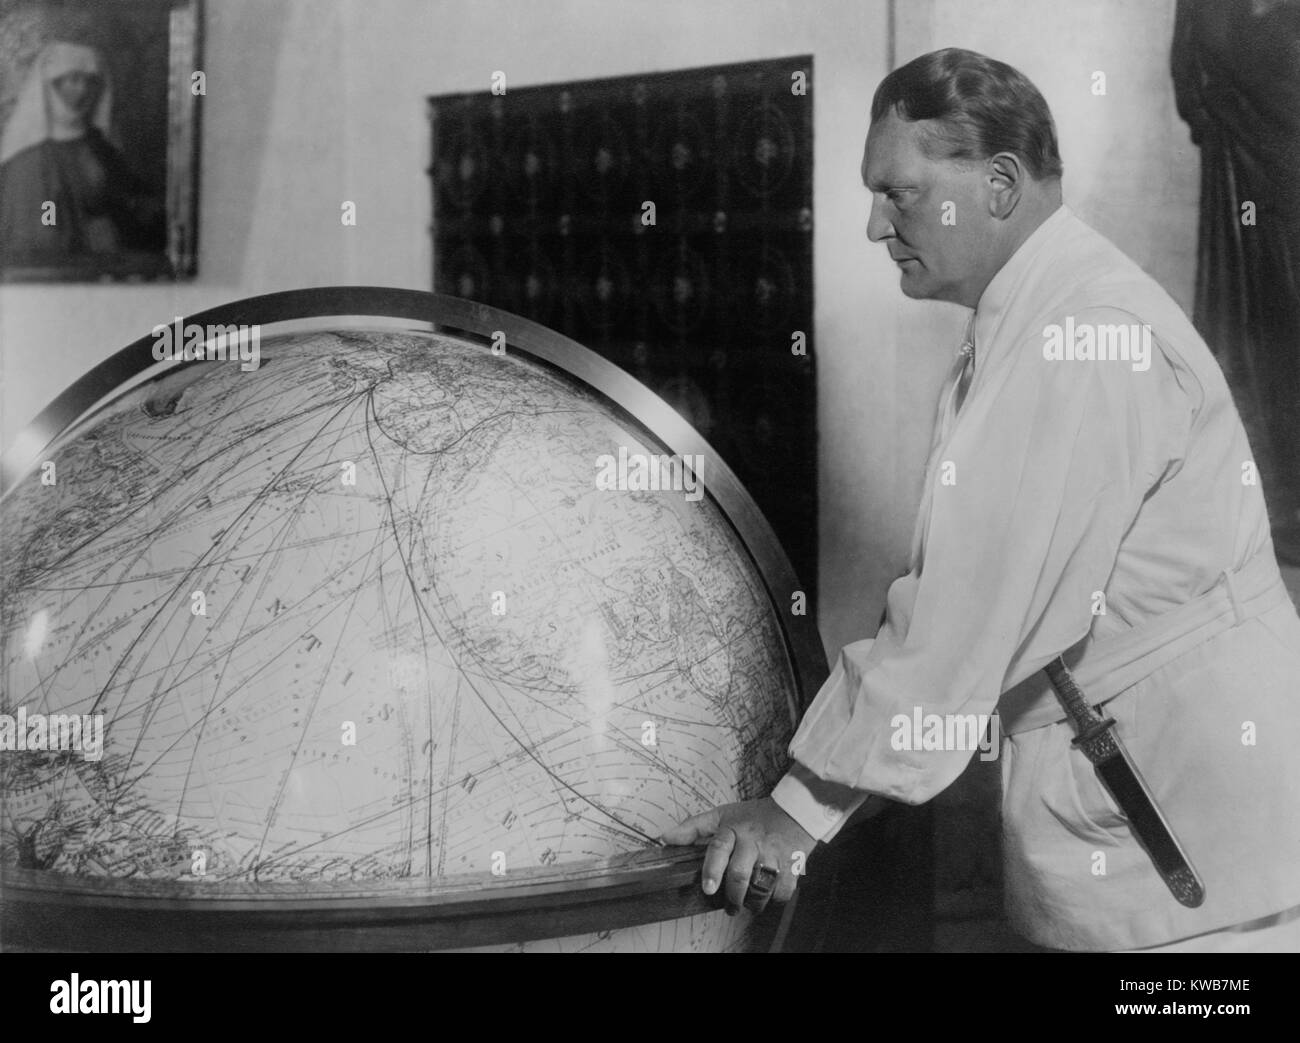 Hermann Goering, leaning toward a large globe in 1939. He was at the peak of his power and influence in the Nazi regime of Adolf Hitler. (BSLOC 2014 8 152) Stock Photo